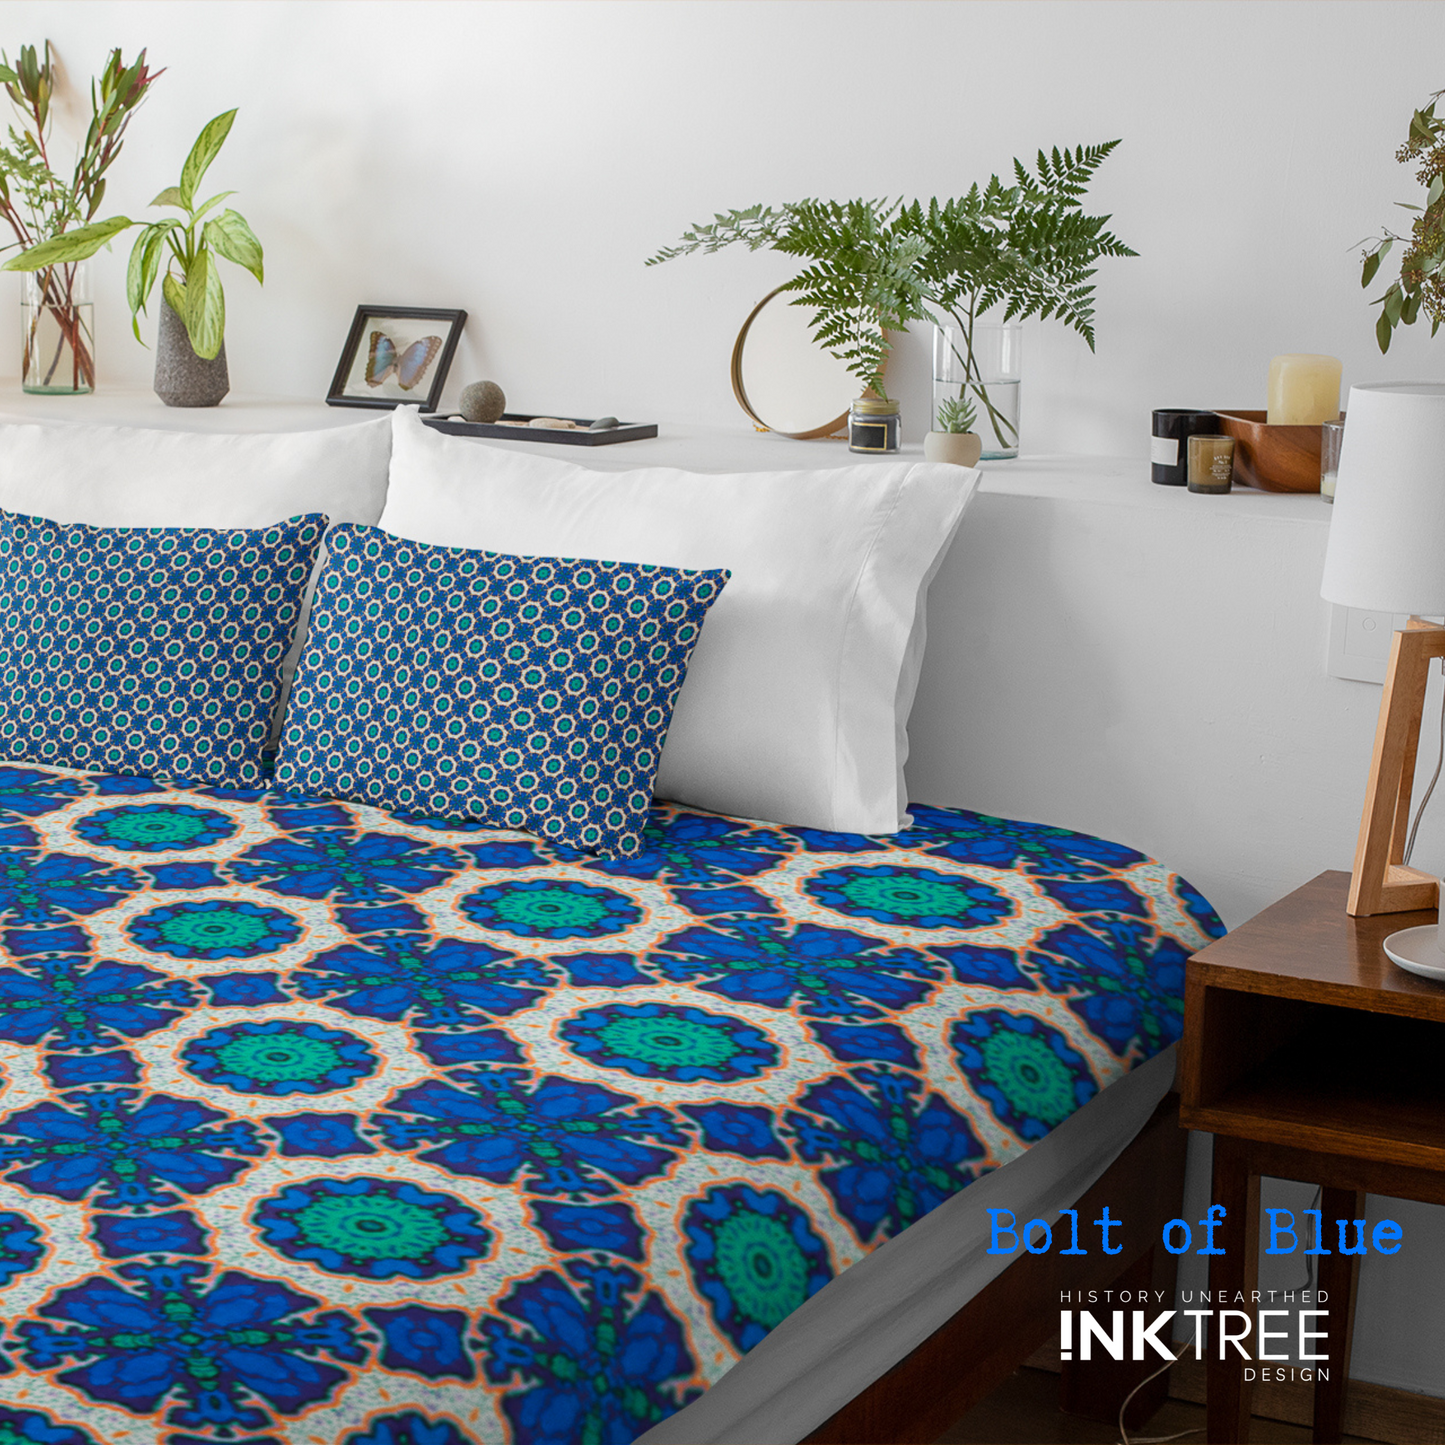 A doona cover and front pillows with an orange, white, black, blue and green floral pattern on a bed with a white wall, white pillows and white backboard background. There is a lamp with a white shade and wood base and plants and a small round metal mirror on the back board. There is also a bolt of blue, history unearthed ink tree design logo in the bottom right hand corner on it.